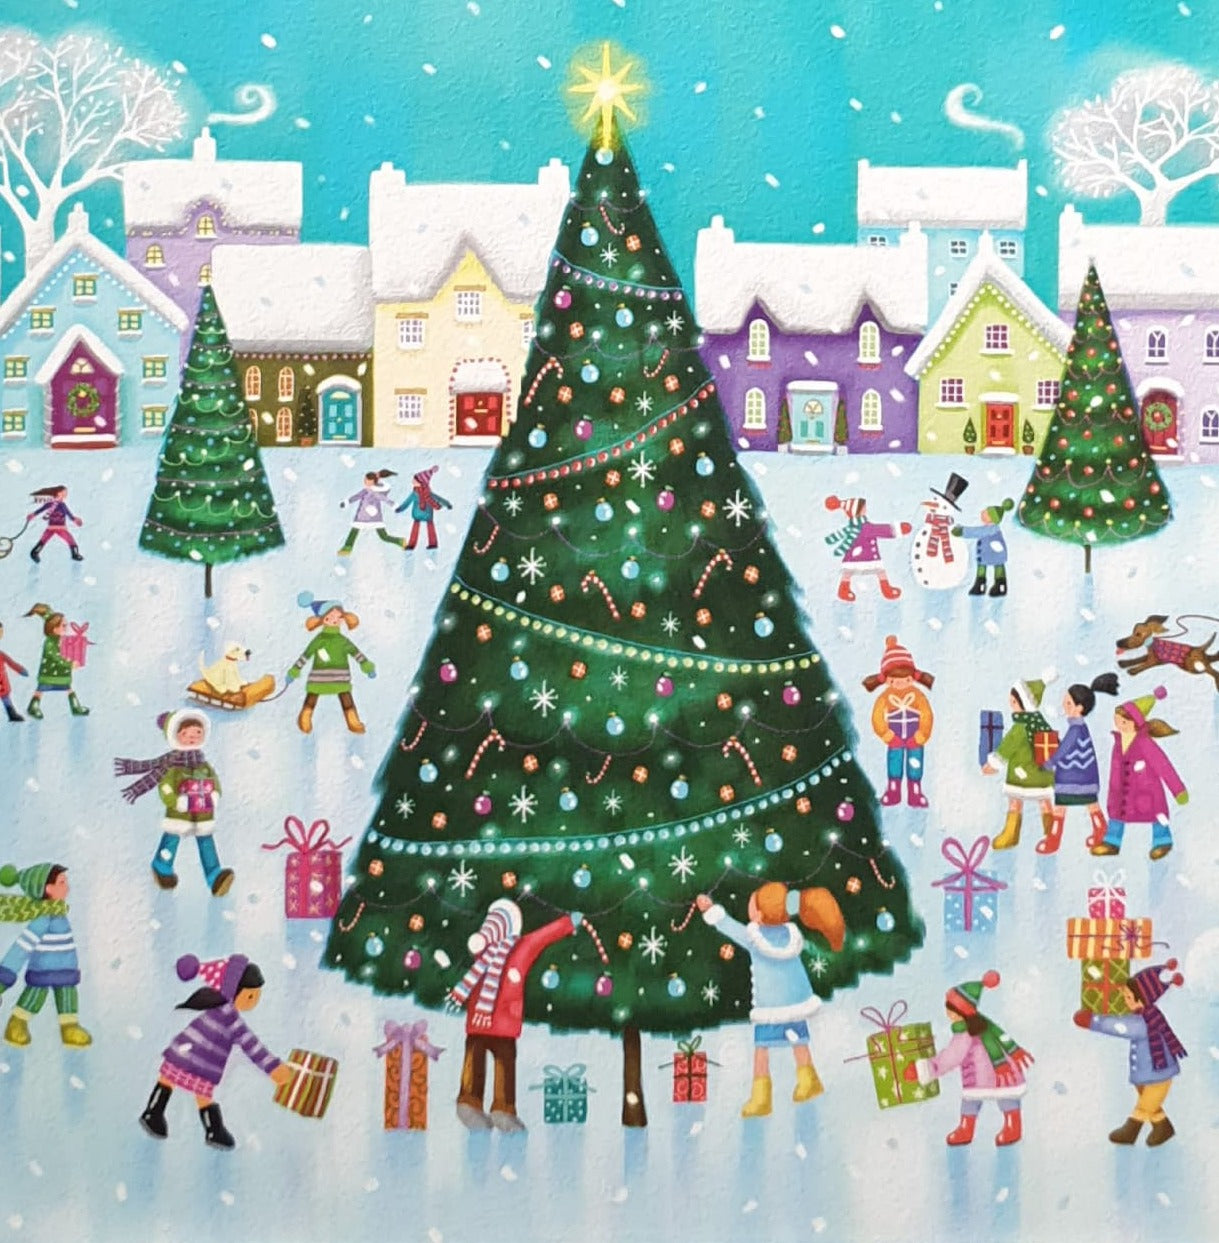 Charity Christmas Card - Pack of 8 Large Size / Northern Ireland Hospice - Children Playing at Christmas Tree